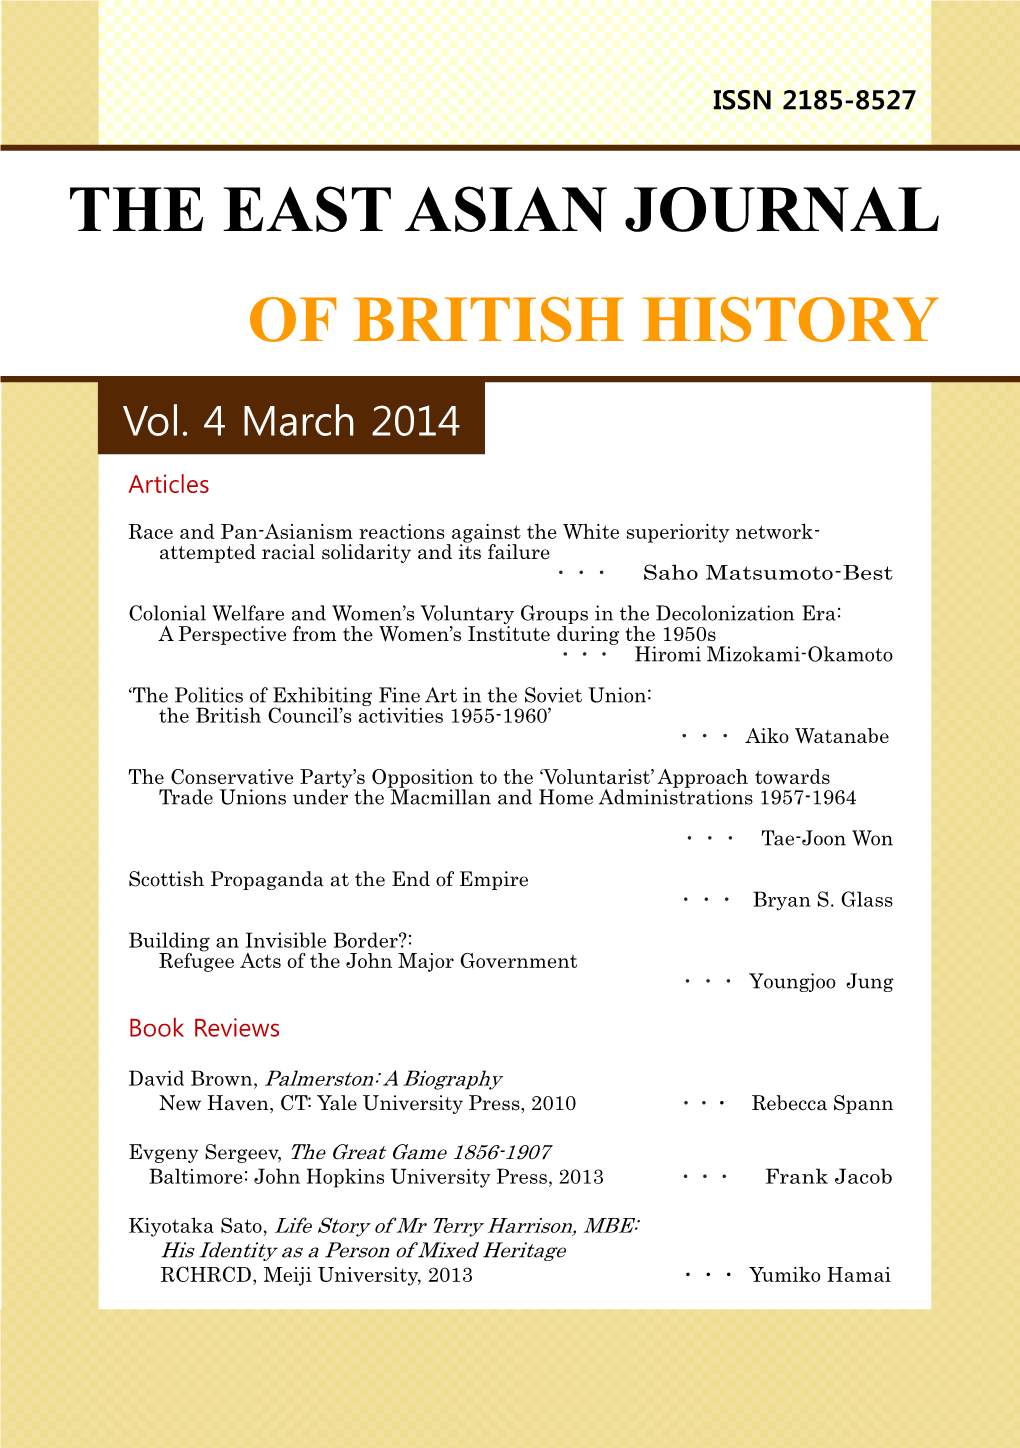 The East Asian Journal of British History, Vol